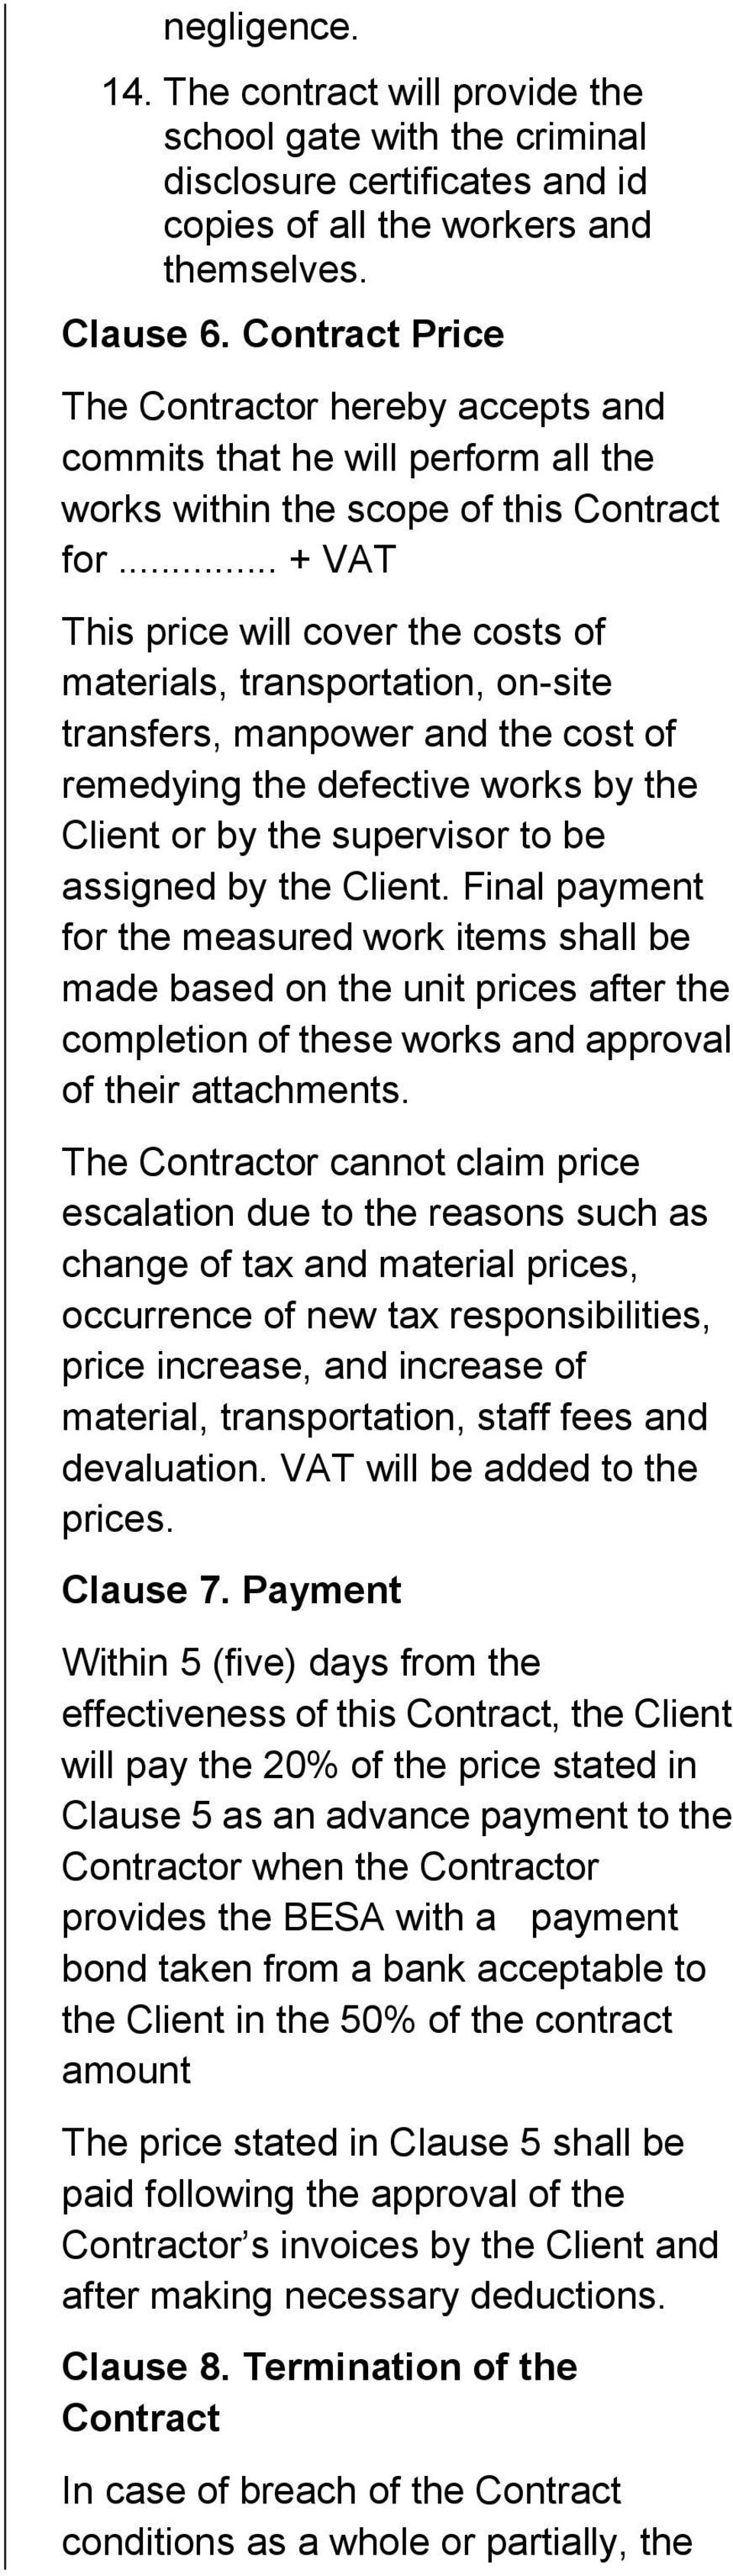 .. + VAT This price will cover the costs of materials, transportation, on-site transfers, manpower and the cost of remedying the defective works by the Client or by the supervisor to be assigned by